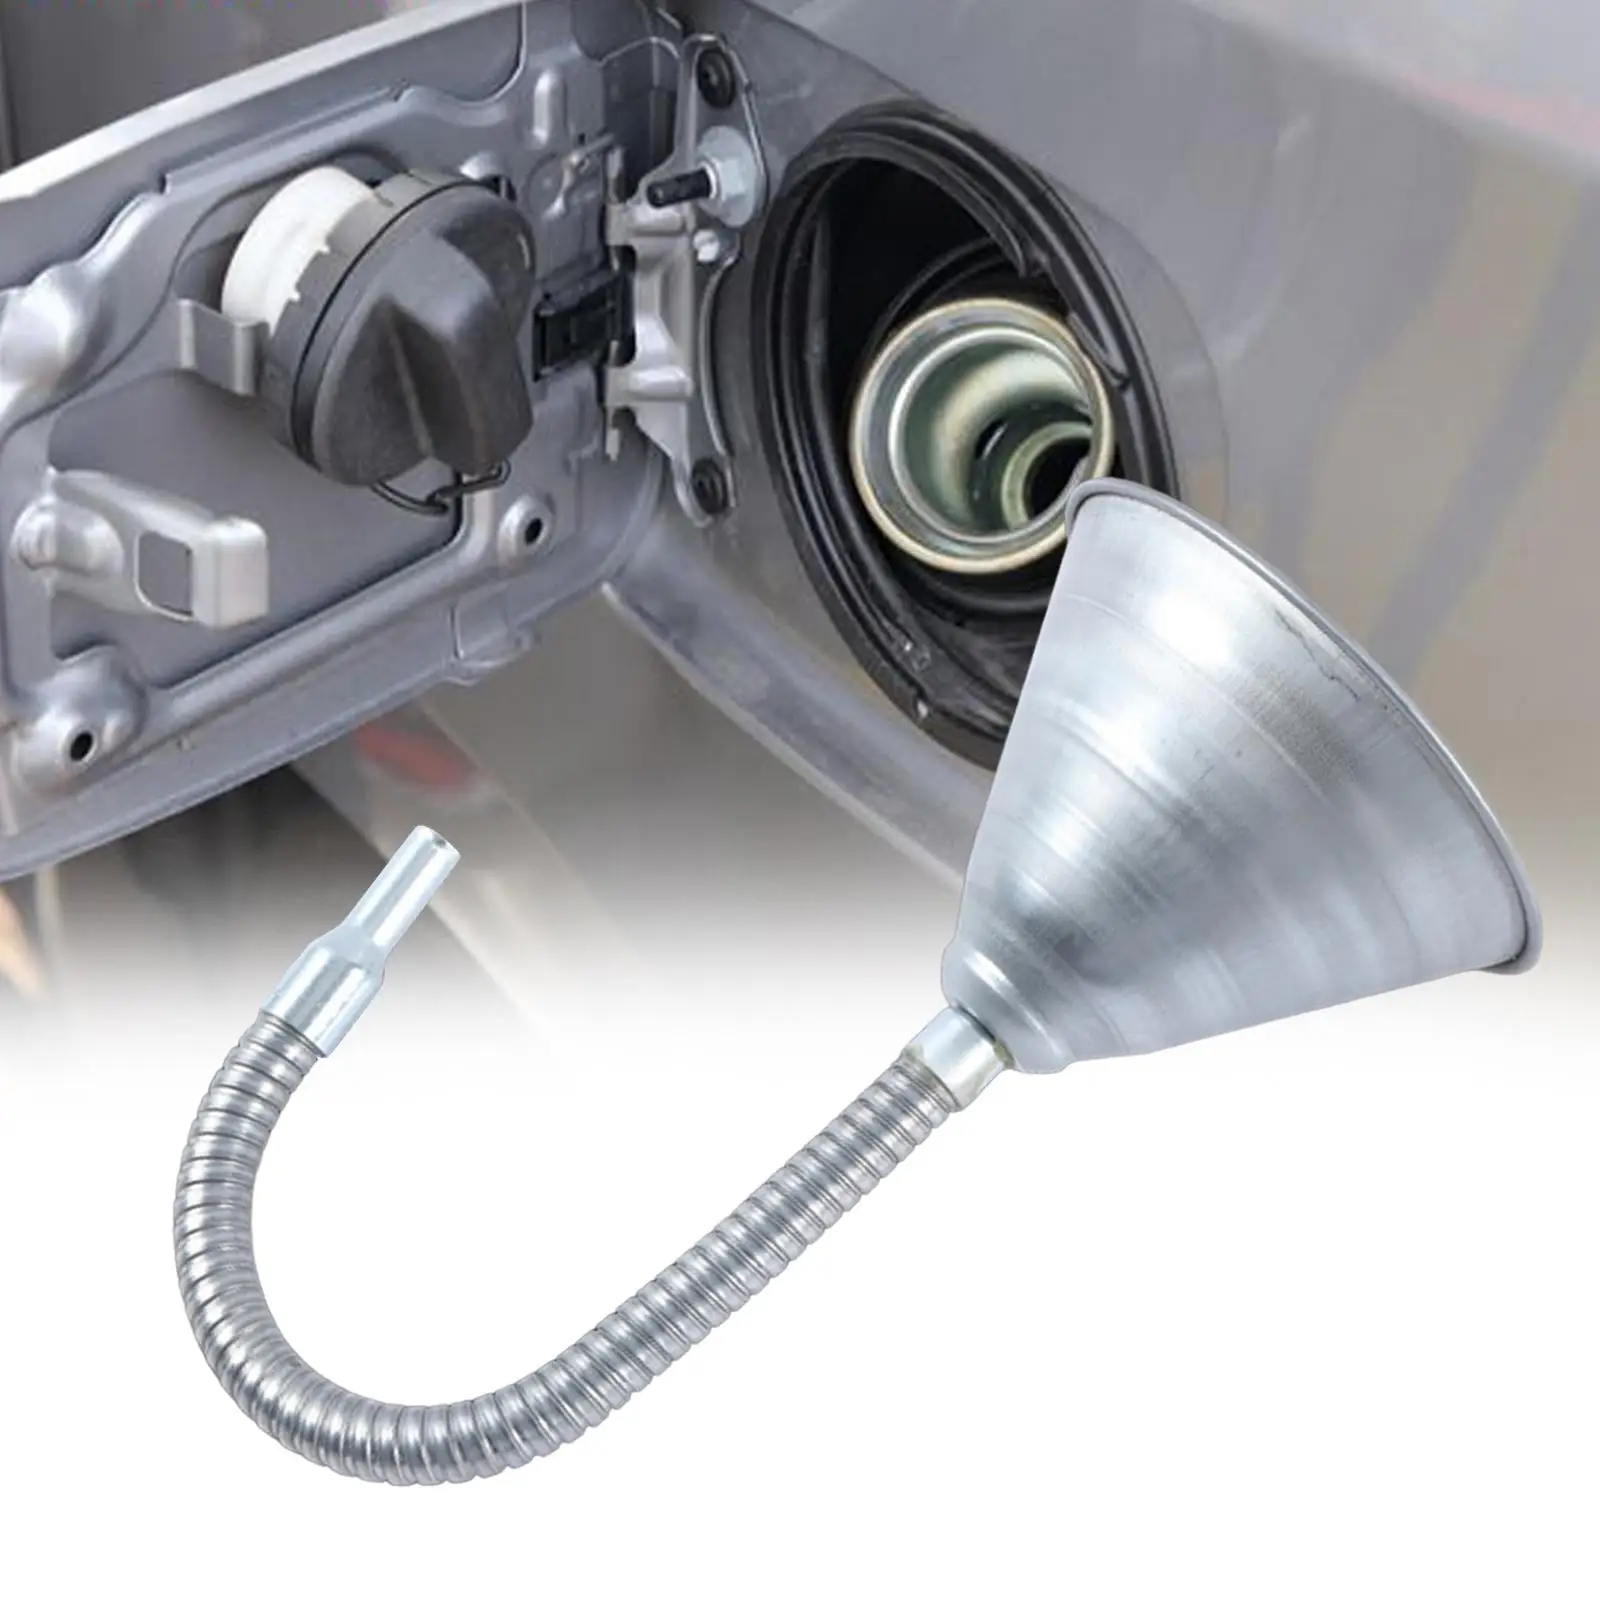 Oil Funnel Metal Funnel Iron Bendable Spout Funnel Long Neck Funnel for Vehicles Fuel